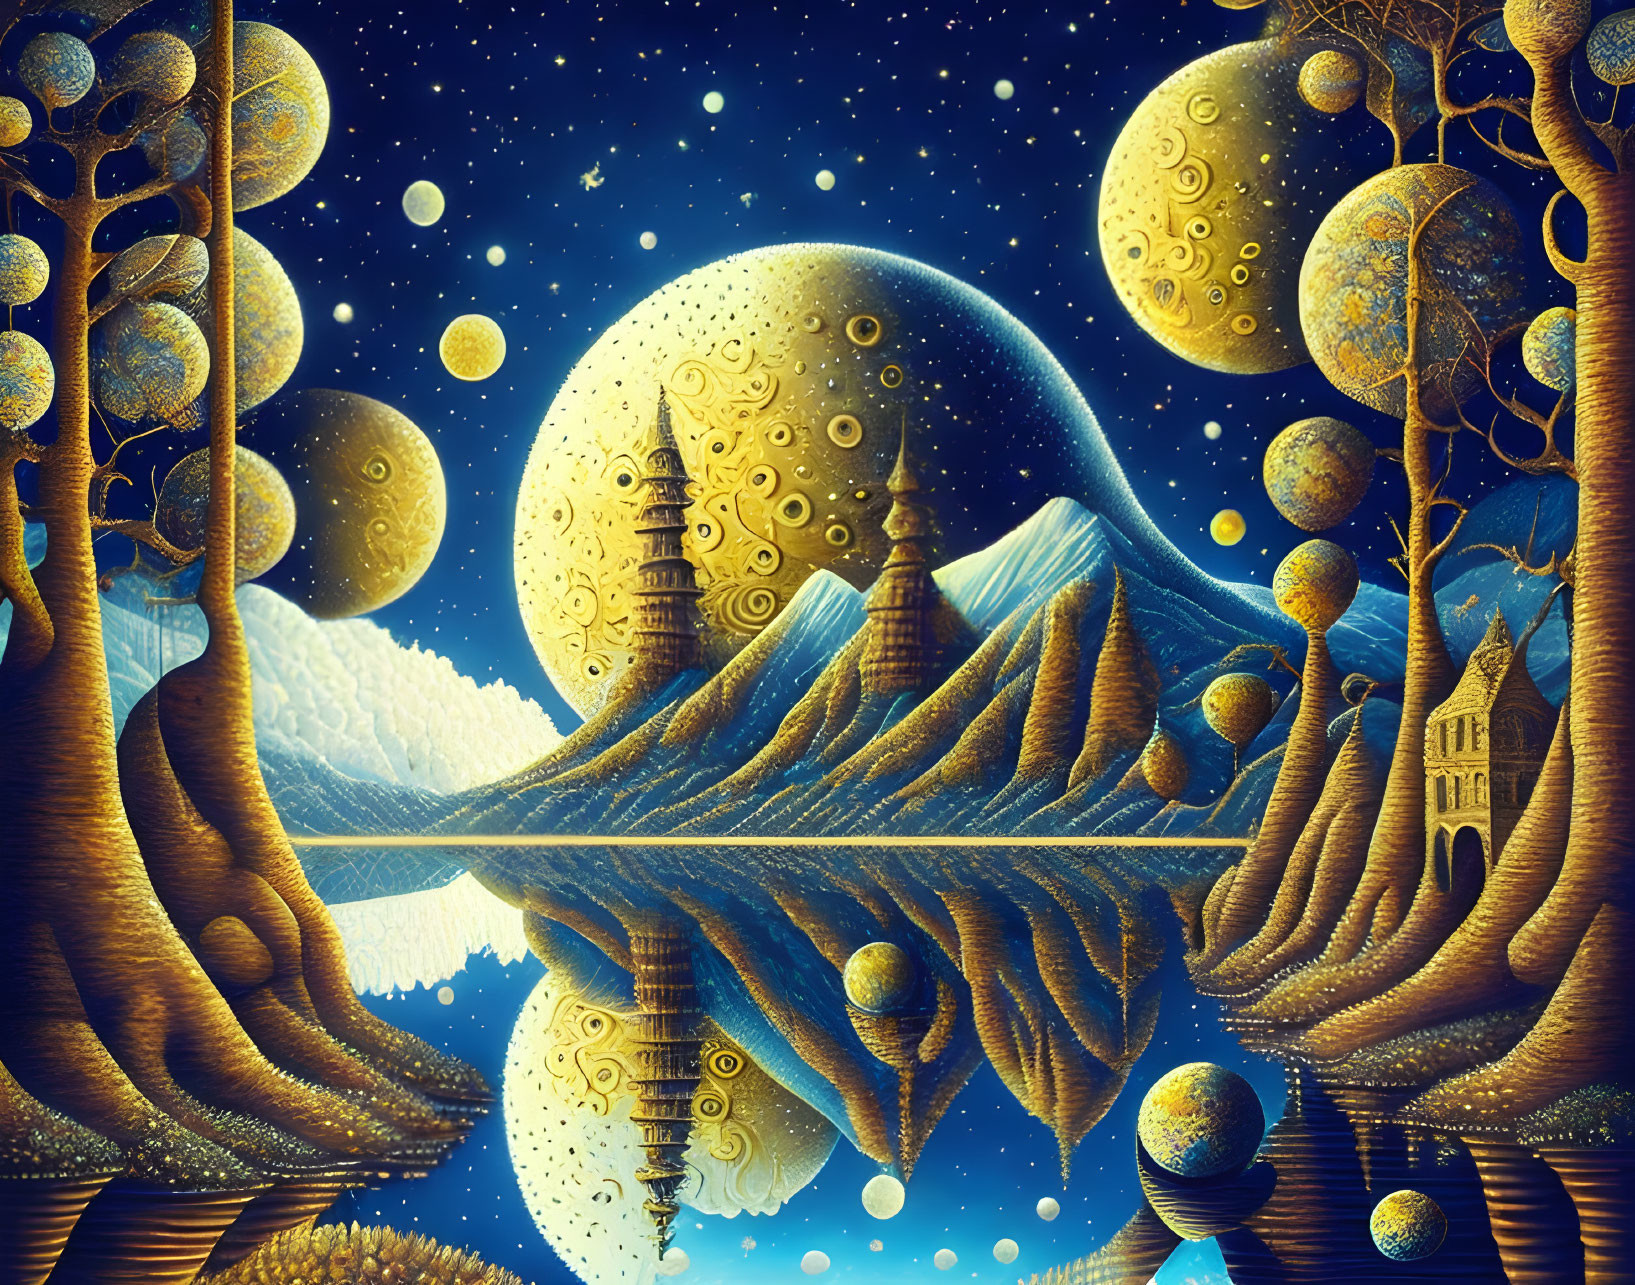 Lake under the Moons